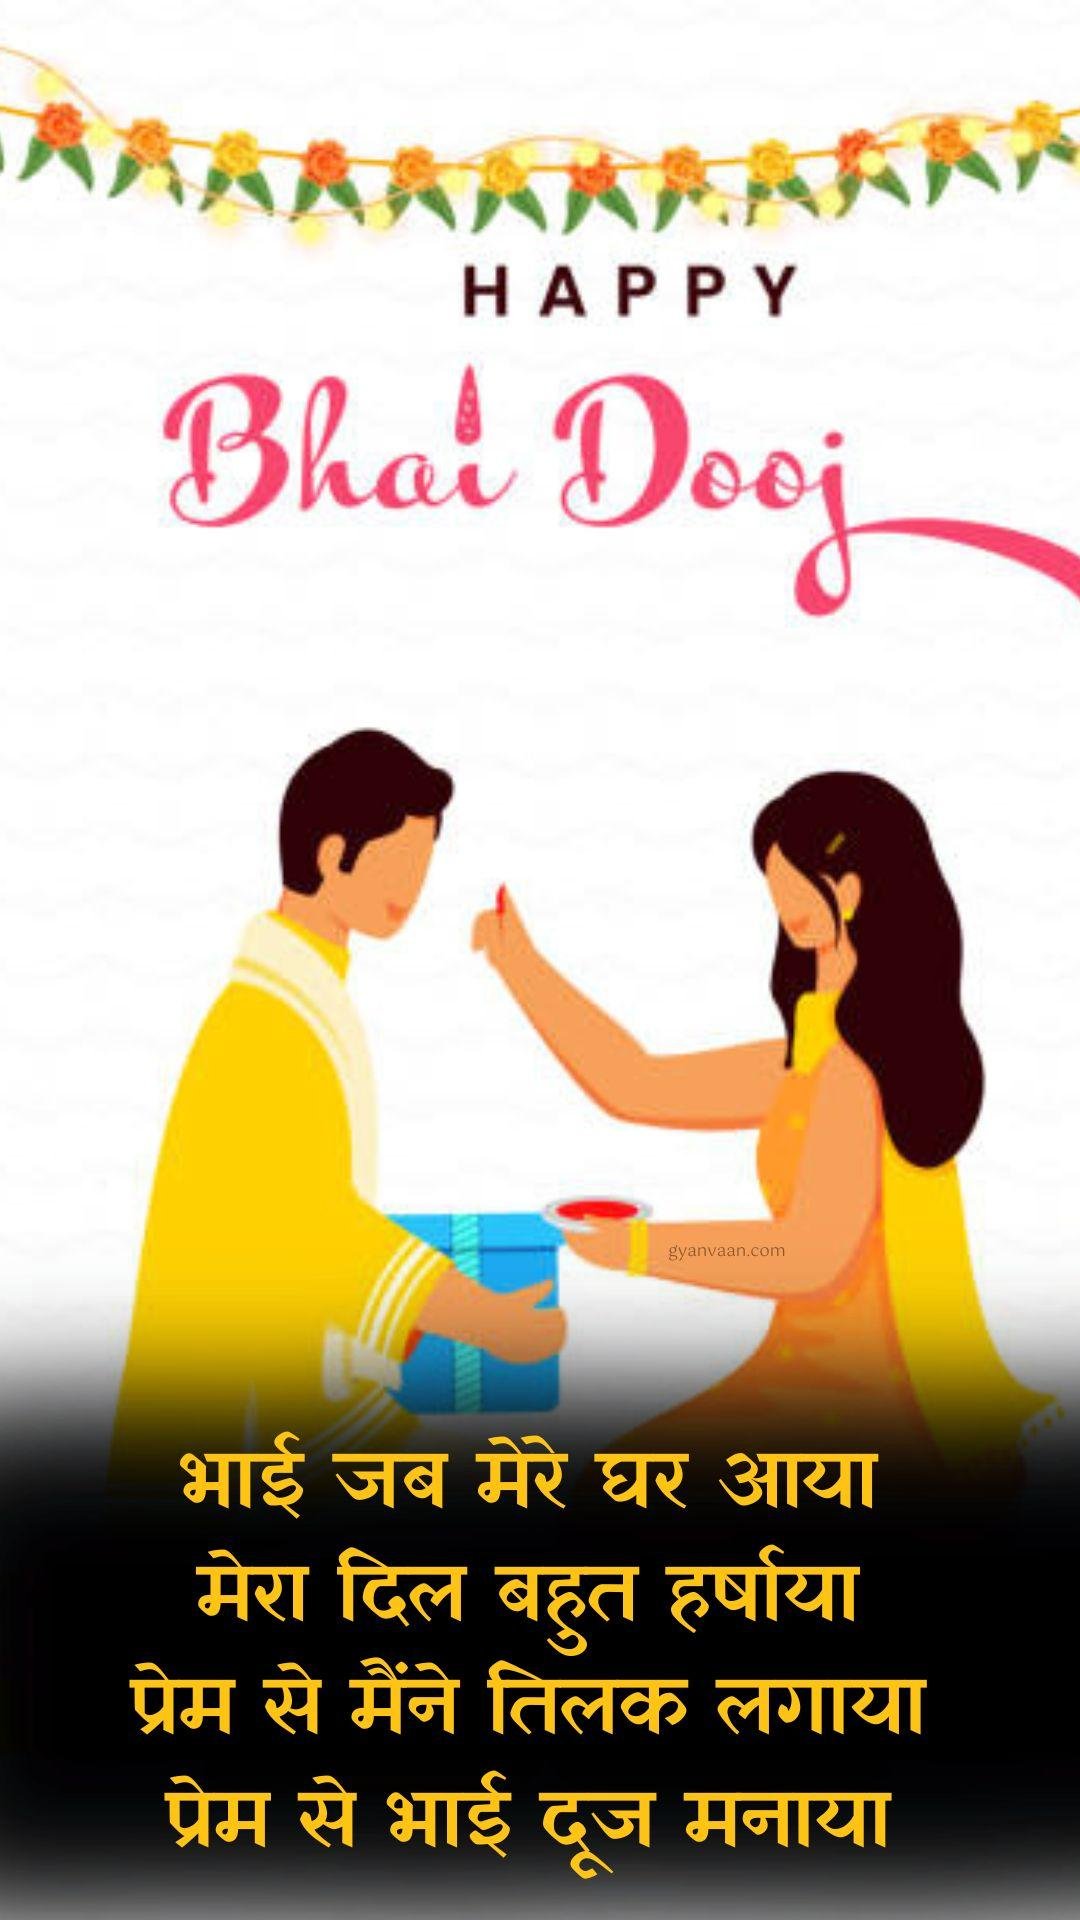 Happy Bhai Dooj Wishes In Hindi With Quotes Status Shubhkamnaye And Messages For Mobile 10 - Bhai Dooj Wishes In Hindi